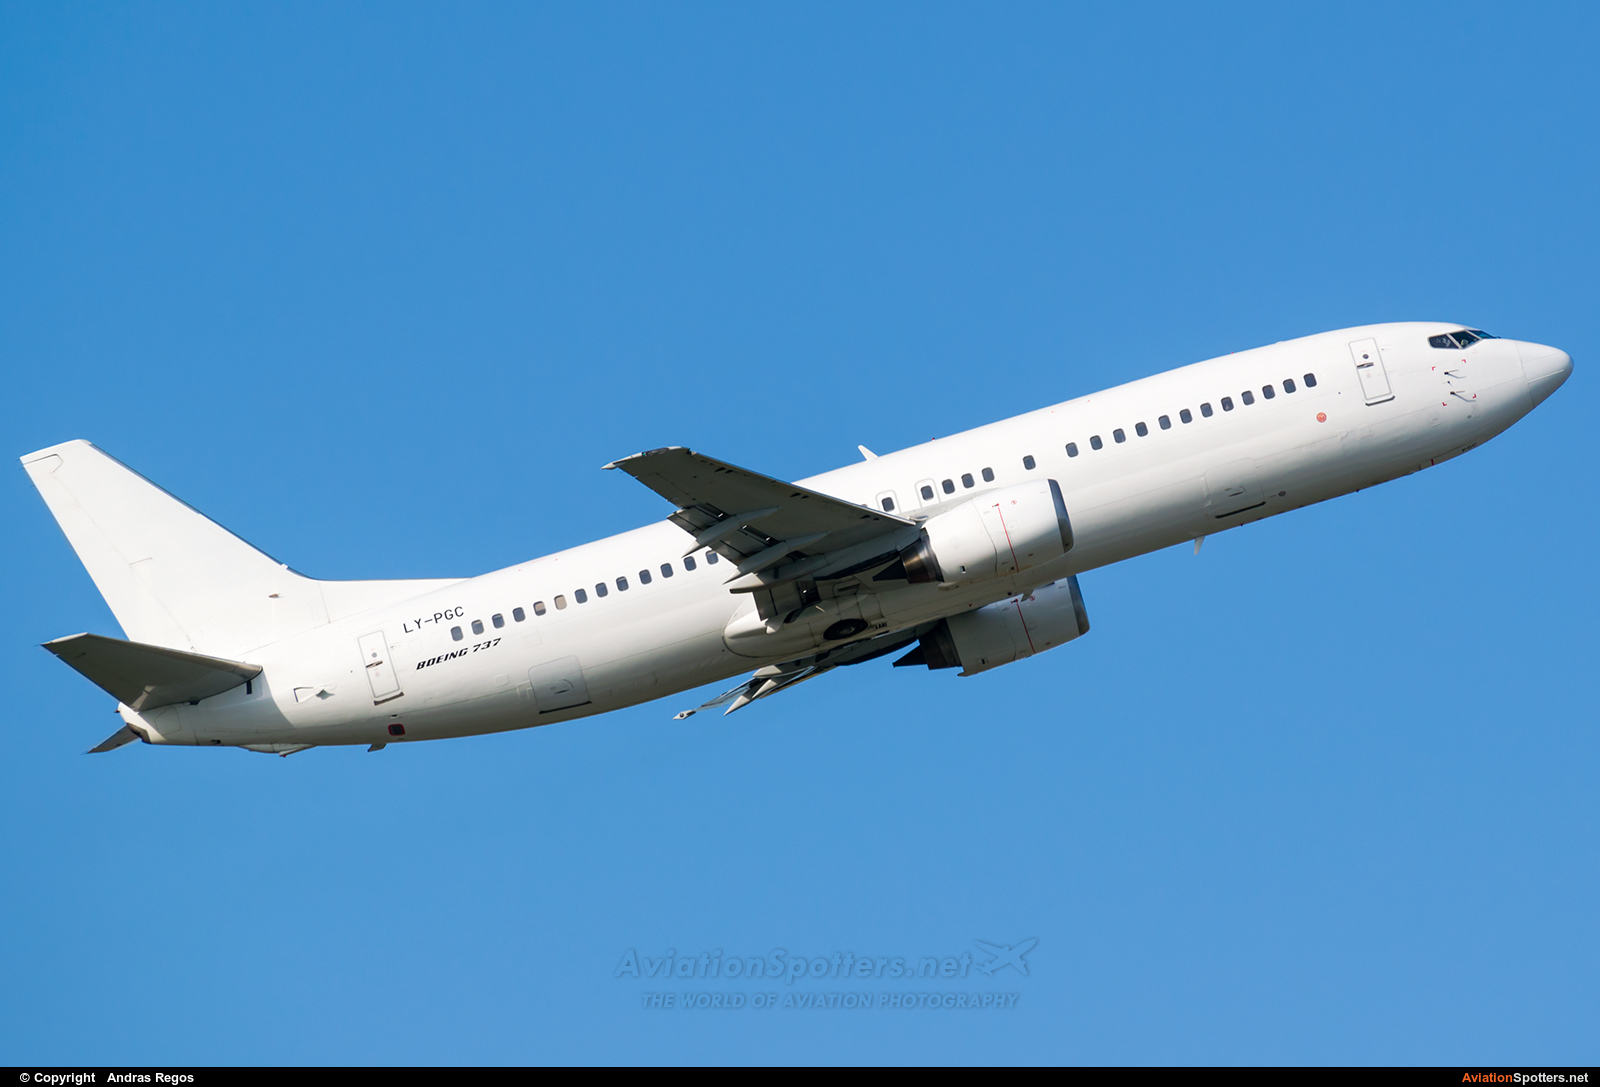 GetJet Airlines  -  737-400  (LY-PGC) By Andras Regos (regos)